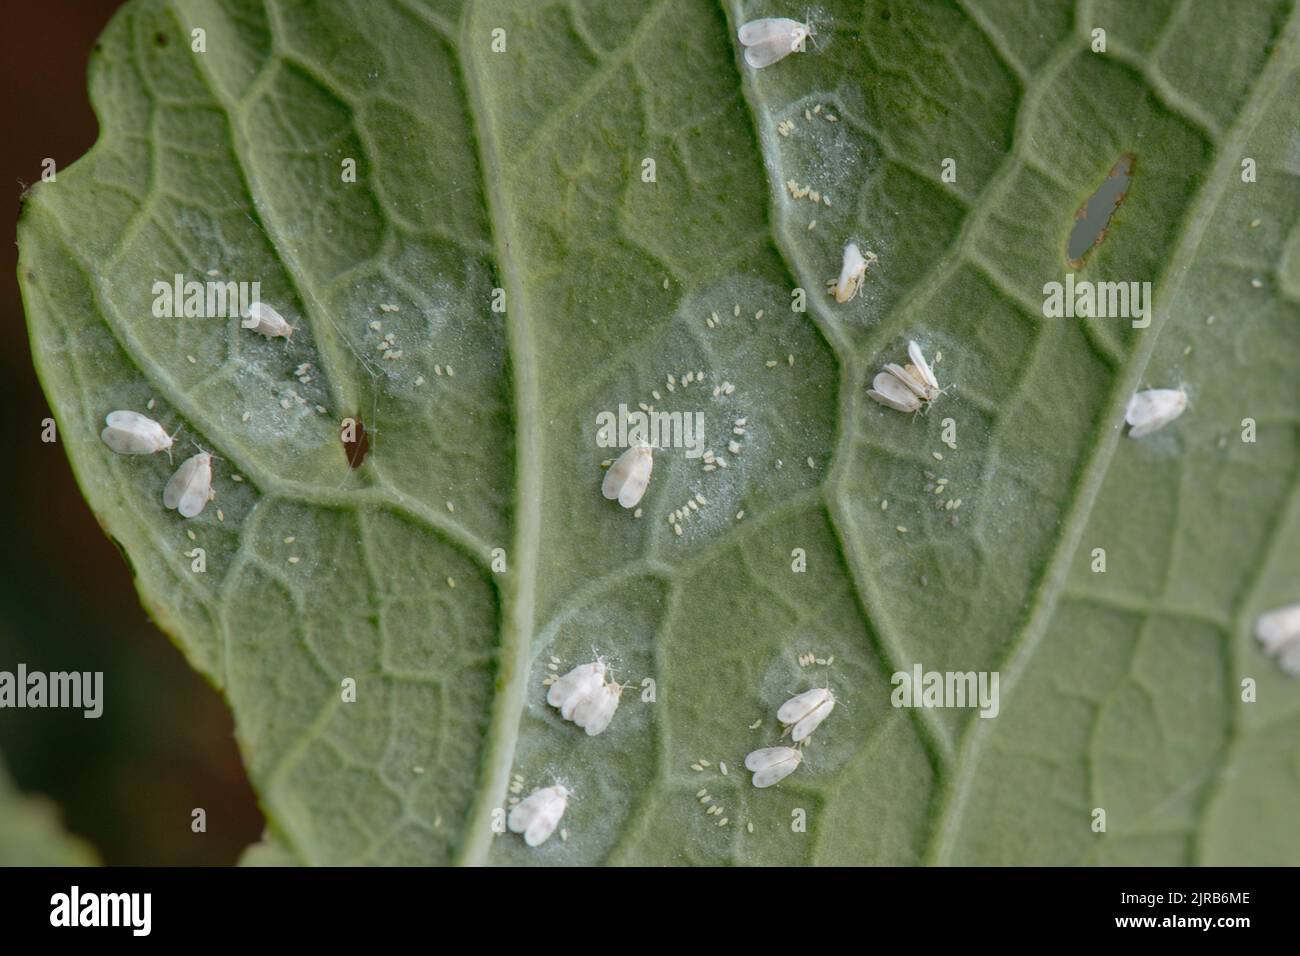 Cabbage whitefly (Aleyrodes proletella) adults and circles of eggs on the underside of purple sprouting broccoli leaf, Berkshire, August Stock Photo